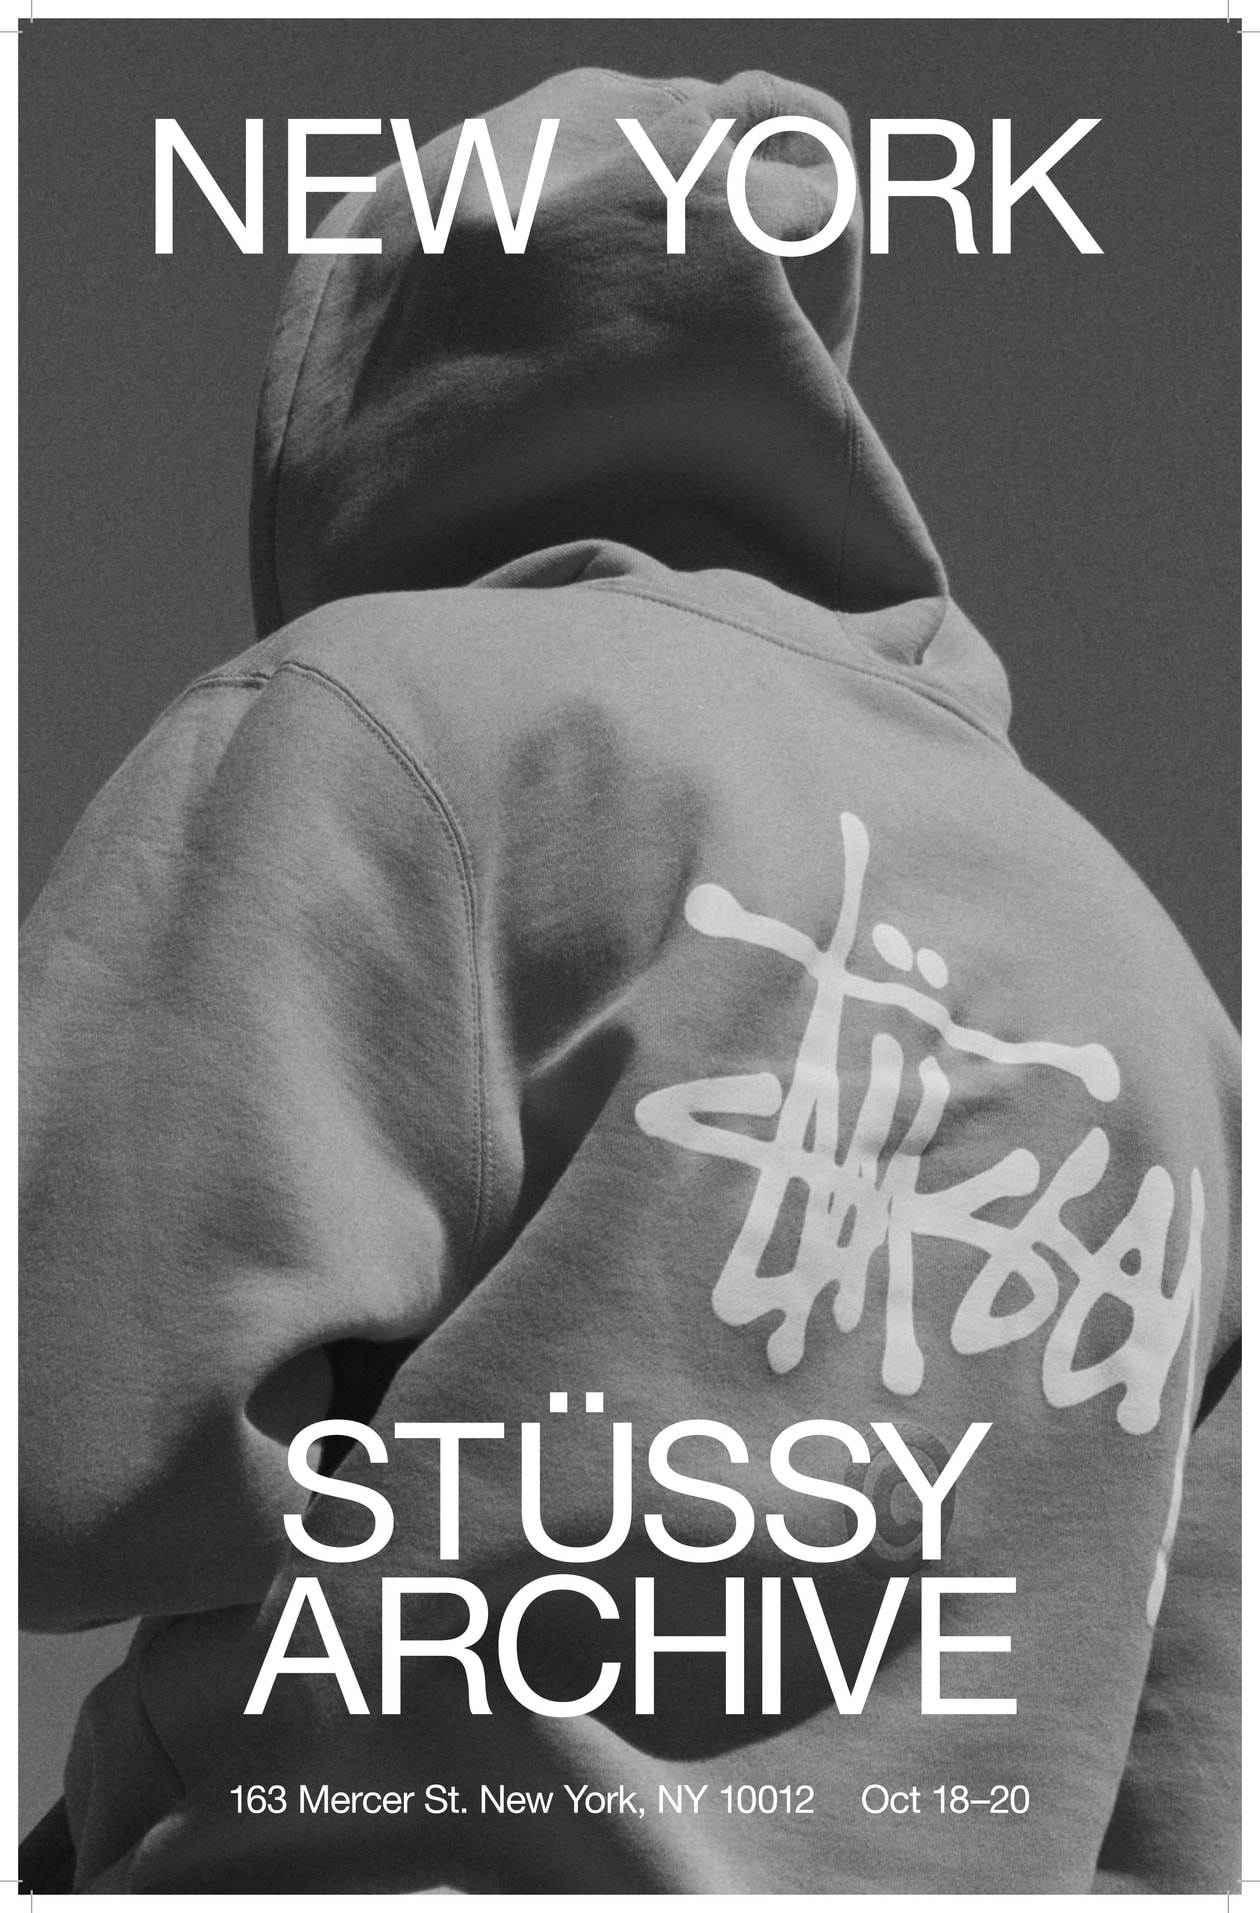 Stüssy FW19 Pop-Up Archive Sale New York City shop store fall winter 2019 october 18